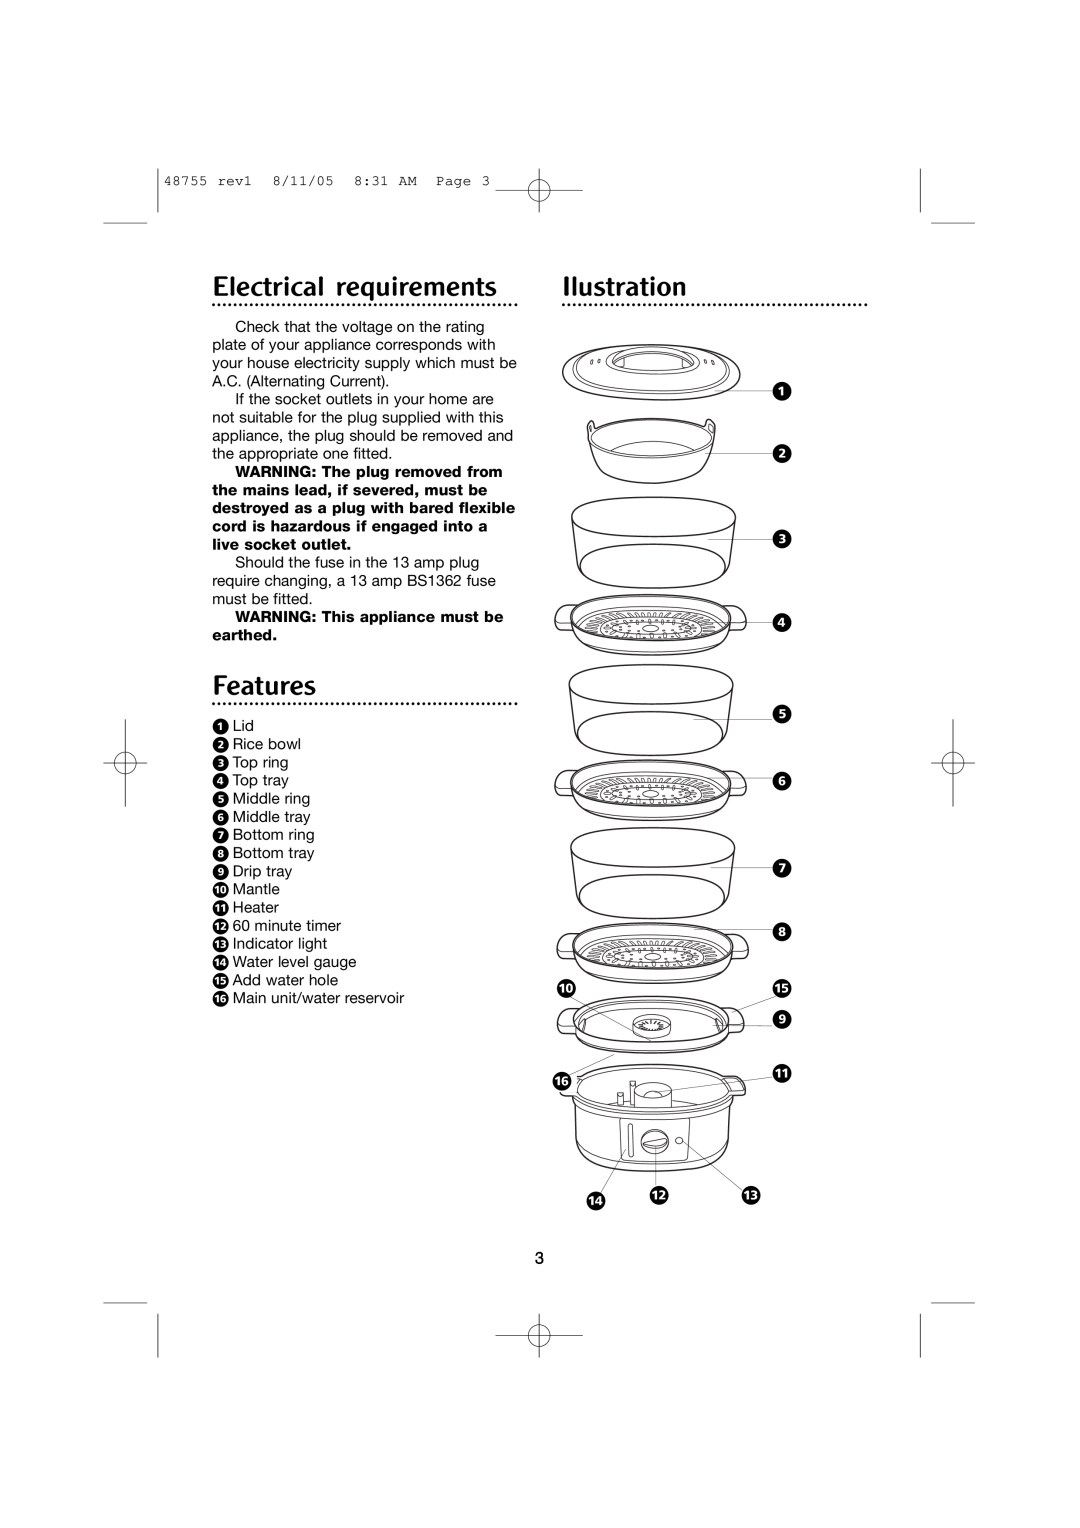 Morphy Richards Stainless steel steamer Electrical requirements, Ilustration, Features, È Á Â, ⁄ ¤ ‹ › ﬁ ﬂ ‡ · Ë ‚ ‰ Ê 